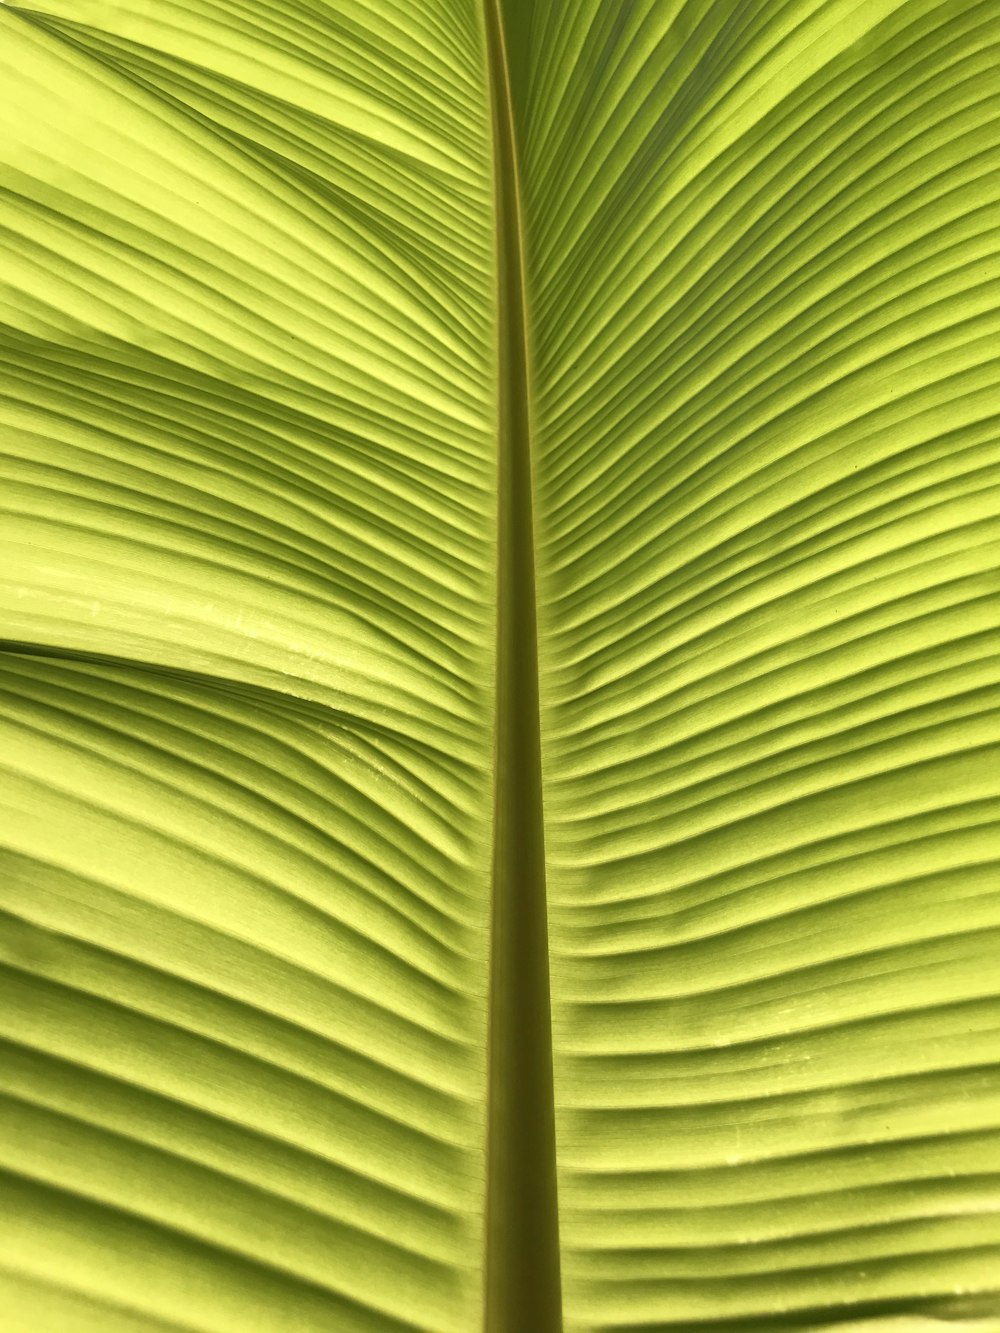 green banana leaf in close up photography